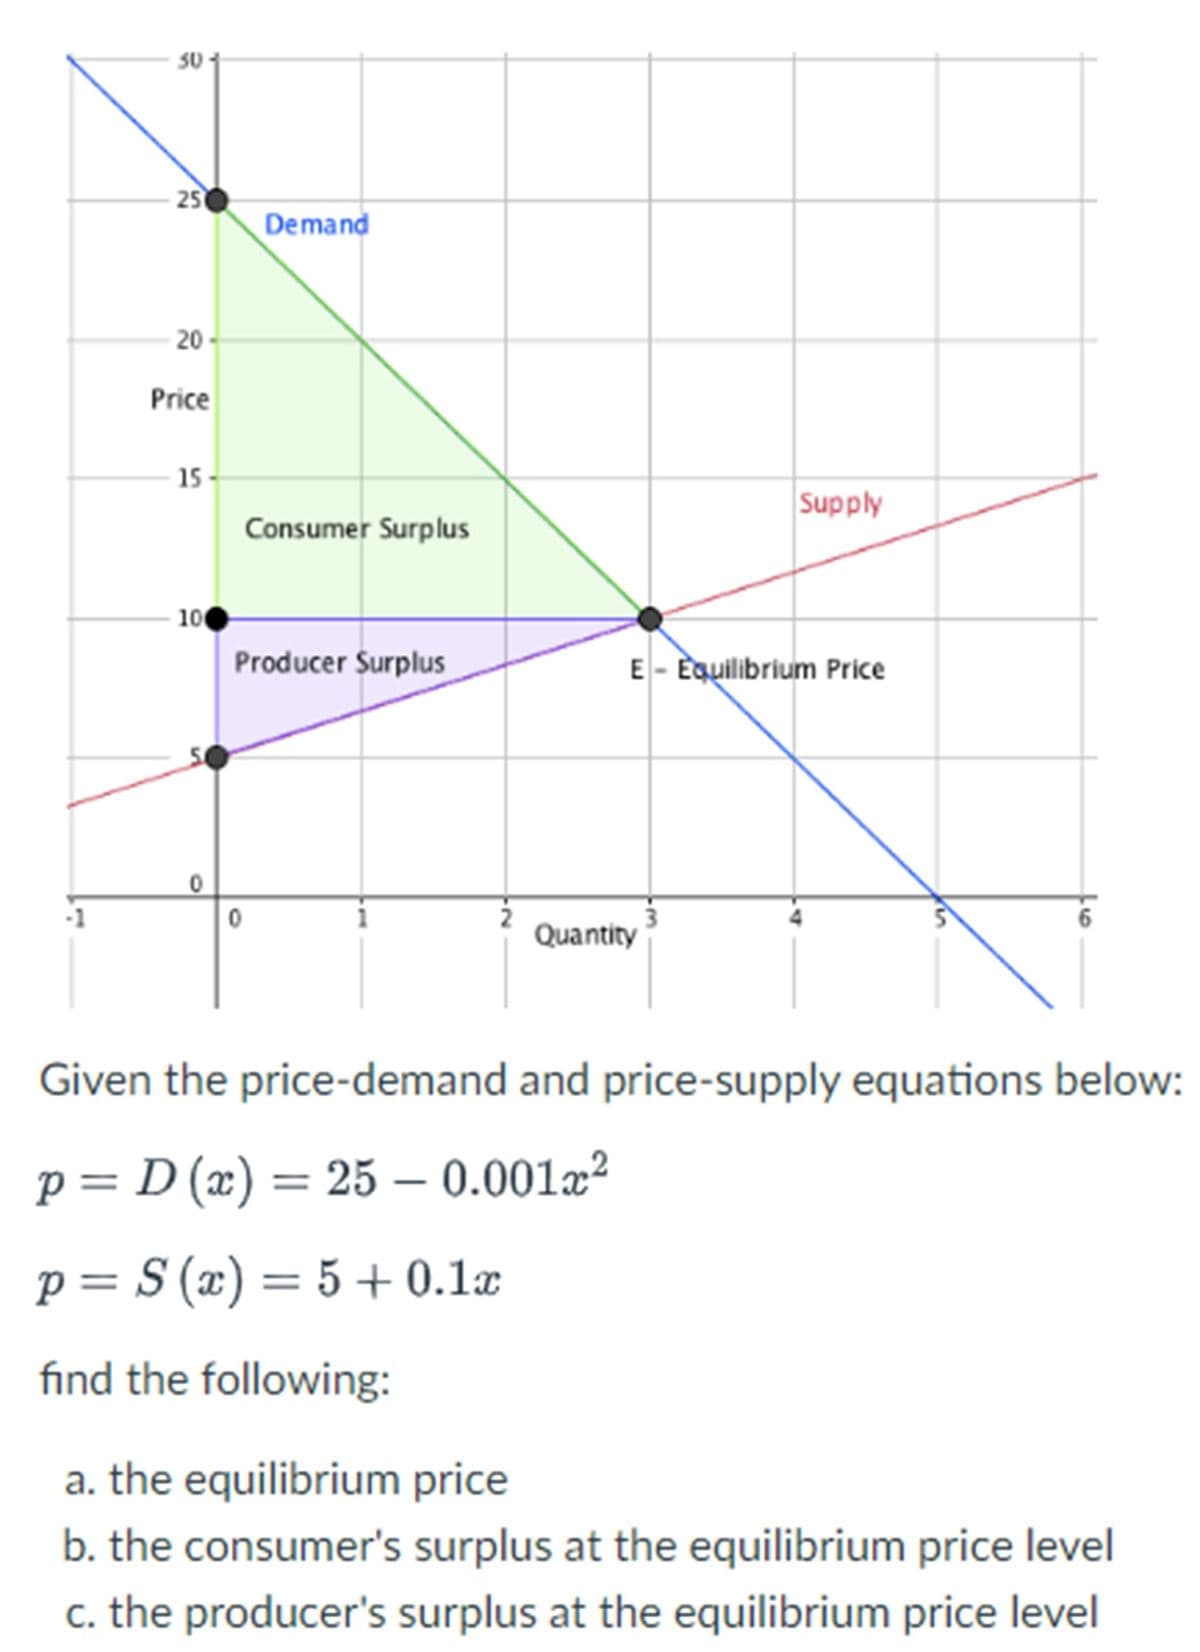 50
25
Demand
20
Price
15
Consumer Surplus
Supply
10
Producer Surplus
E- Equilibrium Price
0
-1
0
2
Quantity
Given the price-demand and price-supply equations below:
-
p = D(x) = 25 – 0.001x2
p = S(x) = 5 +0.1x
find the following:
a. the equilibrium price
b. the consumer's surplus at the equilibrium price level
c. the producer's surplus at the equilibrium price level